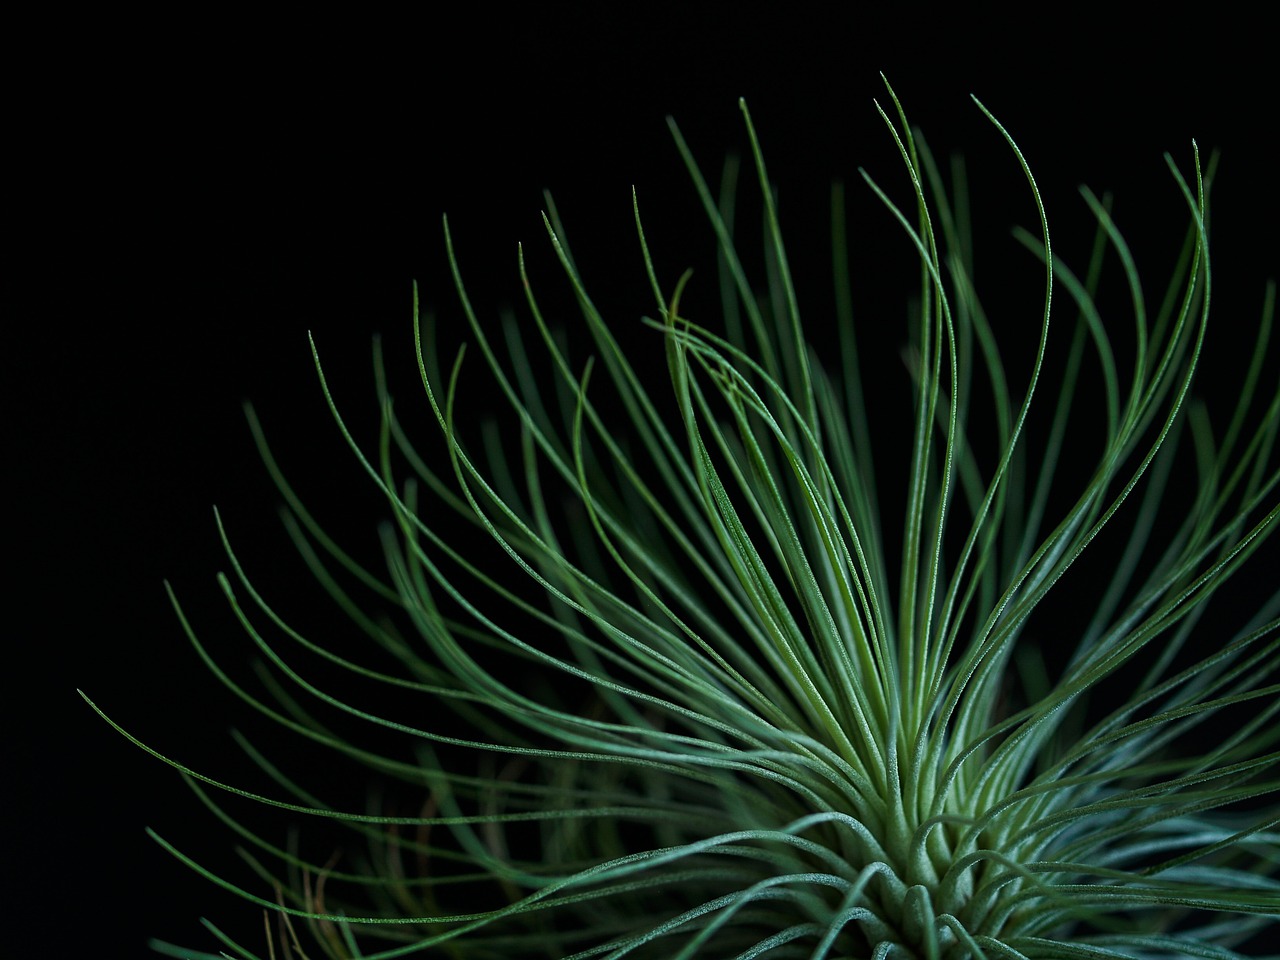 a close up of a plant with green leaves, a macro photograph, by George Jamesone, minimalism, twirling glowing sea plants, hymenocallis coronaria, shot at dark with studio lights, curvaceous. detailed